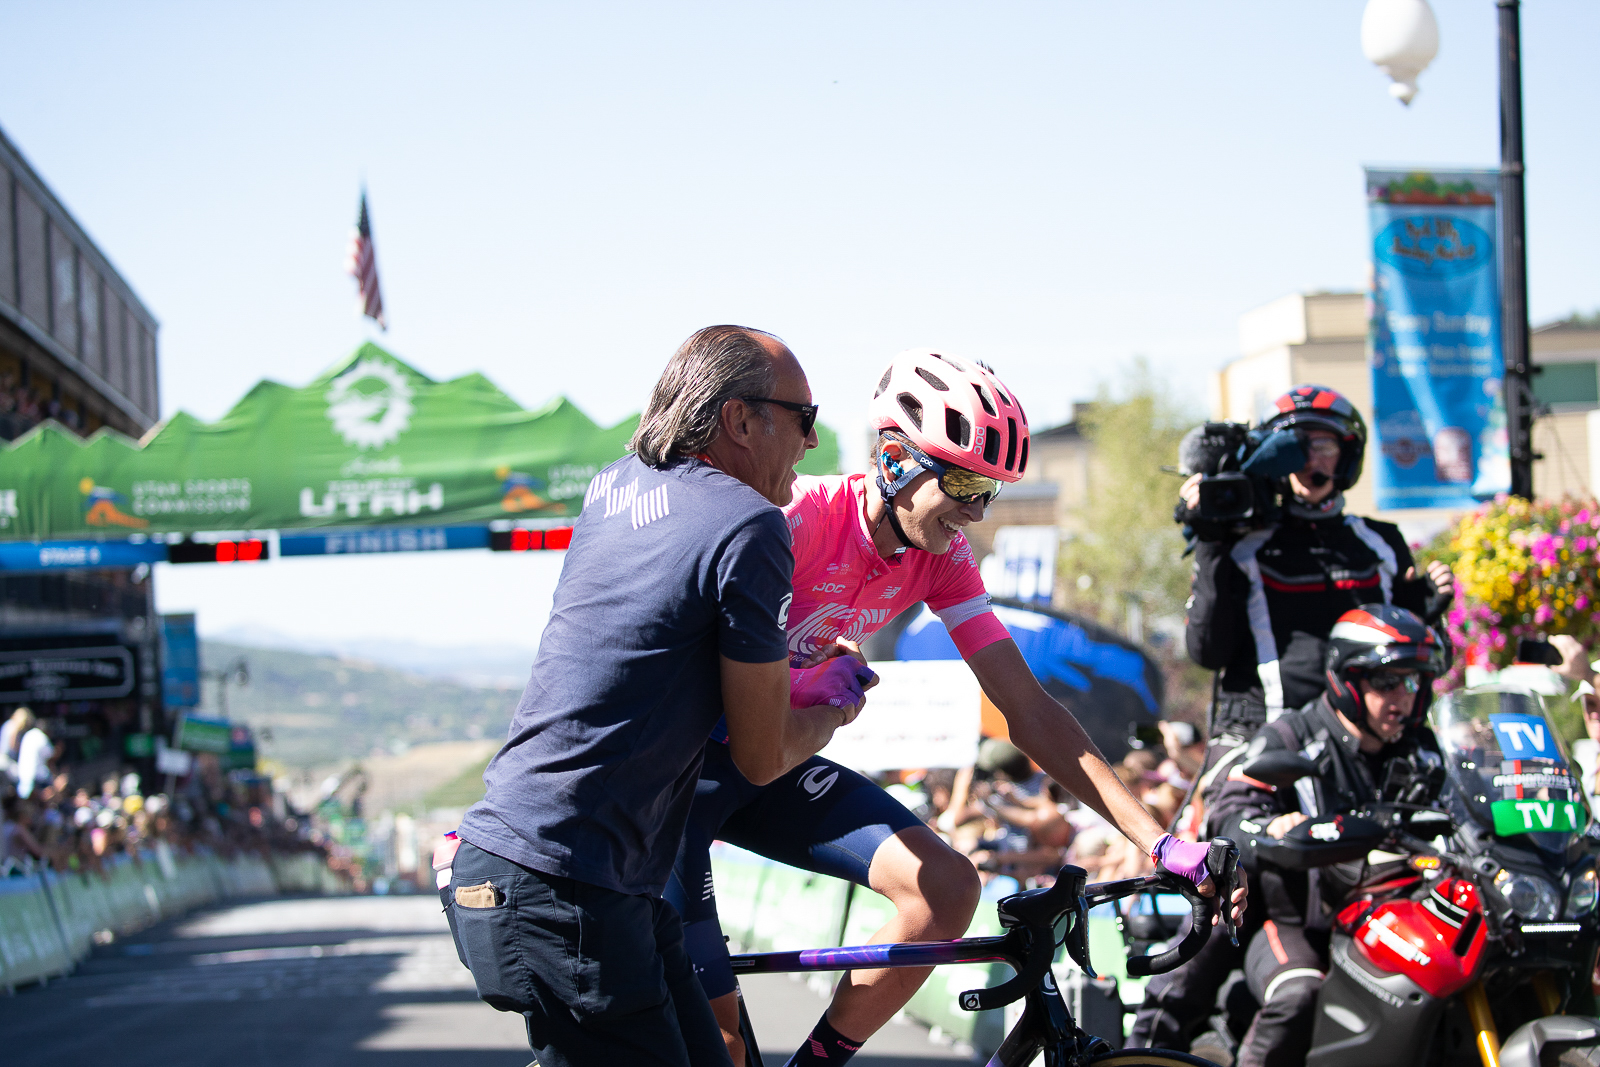 EF Education First swanny and Joe Dombrowski with huge smiles